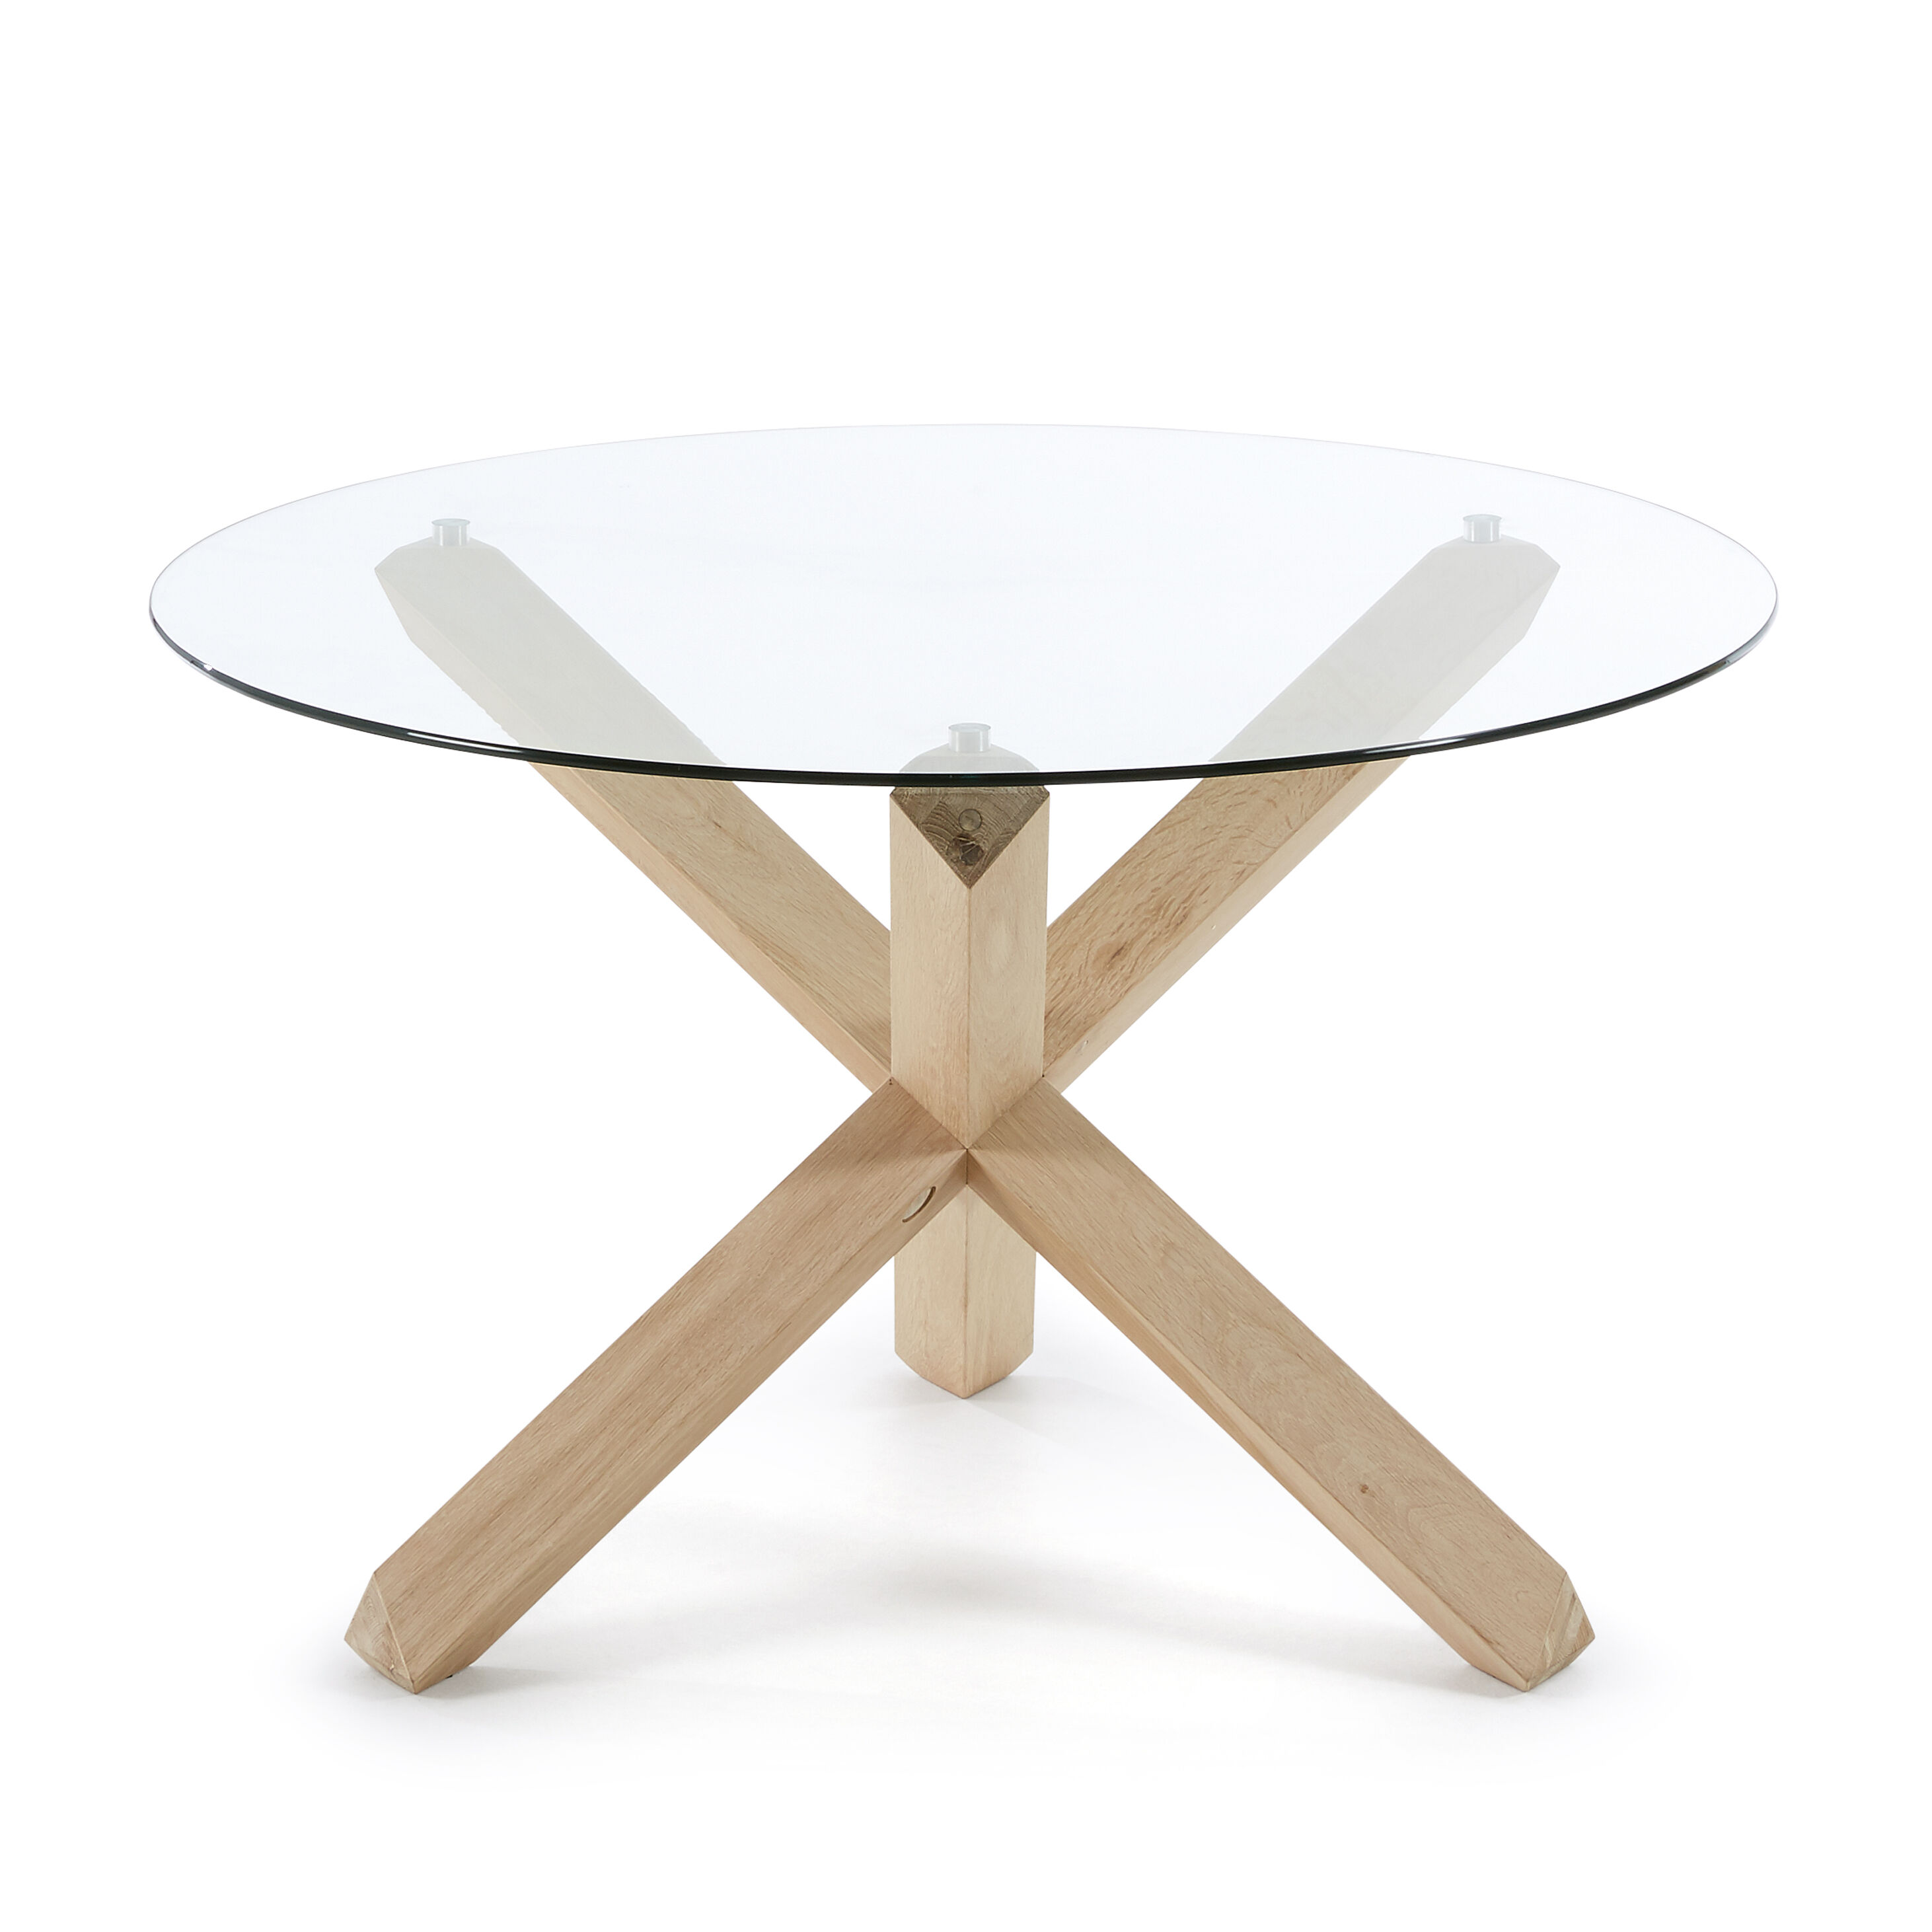 Kave Home Lotus round glass table with solid oak legs Ø 120 cm